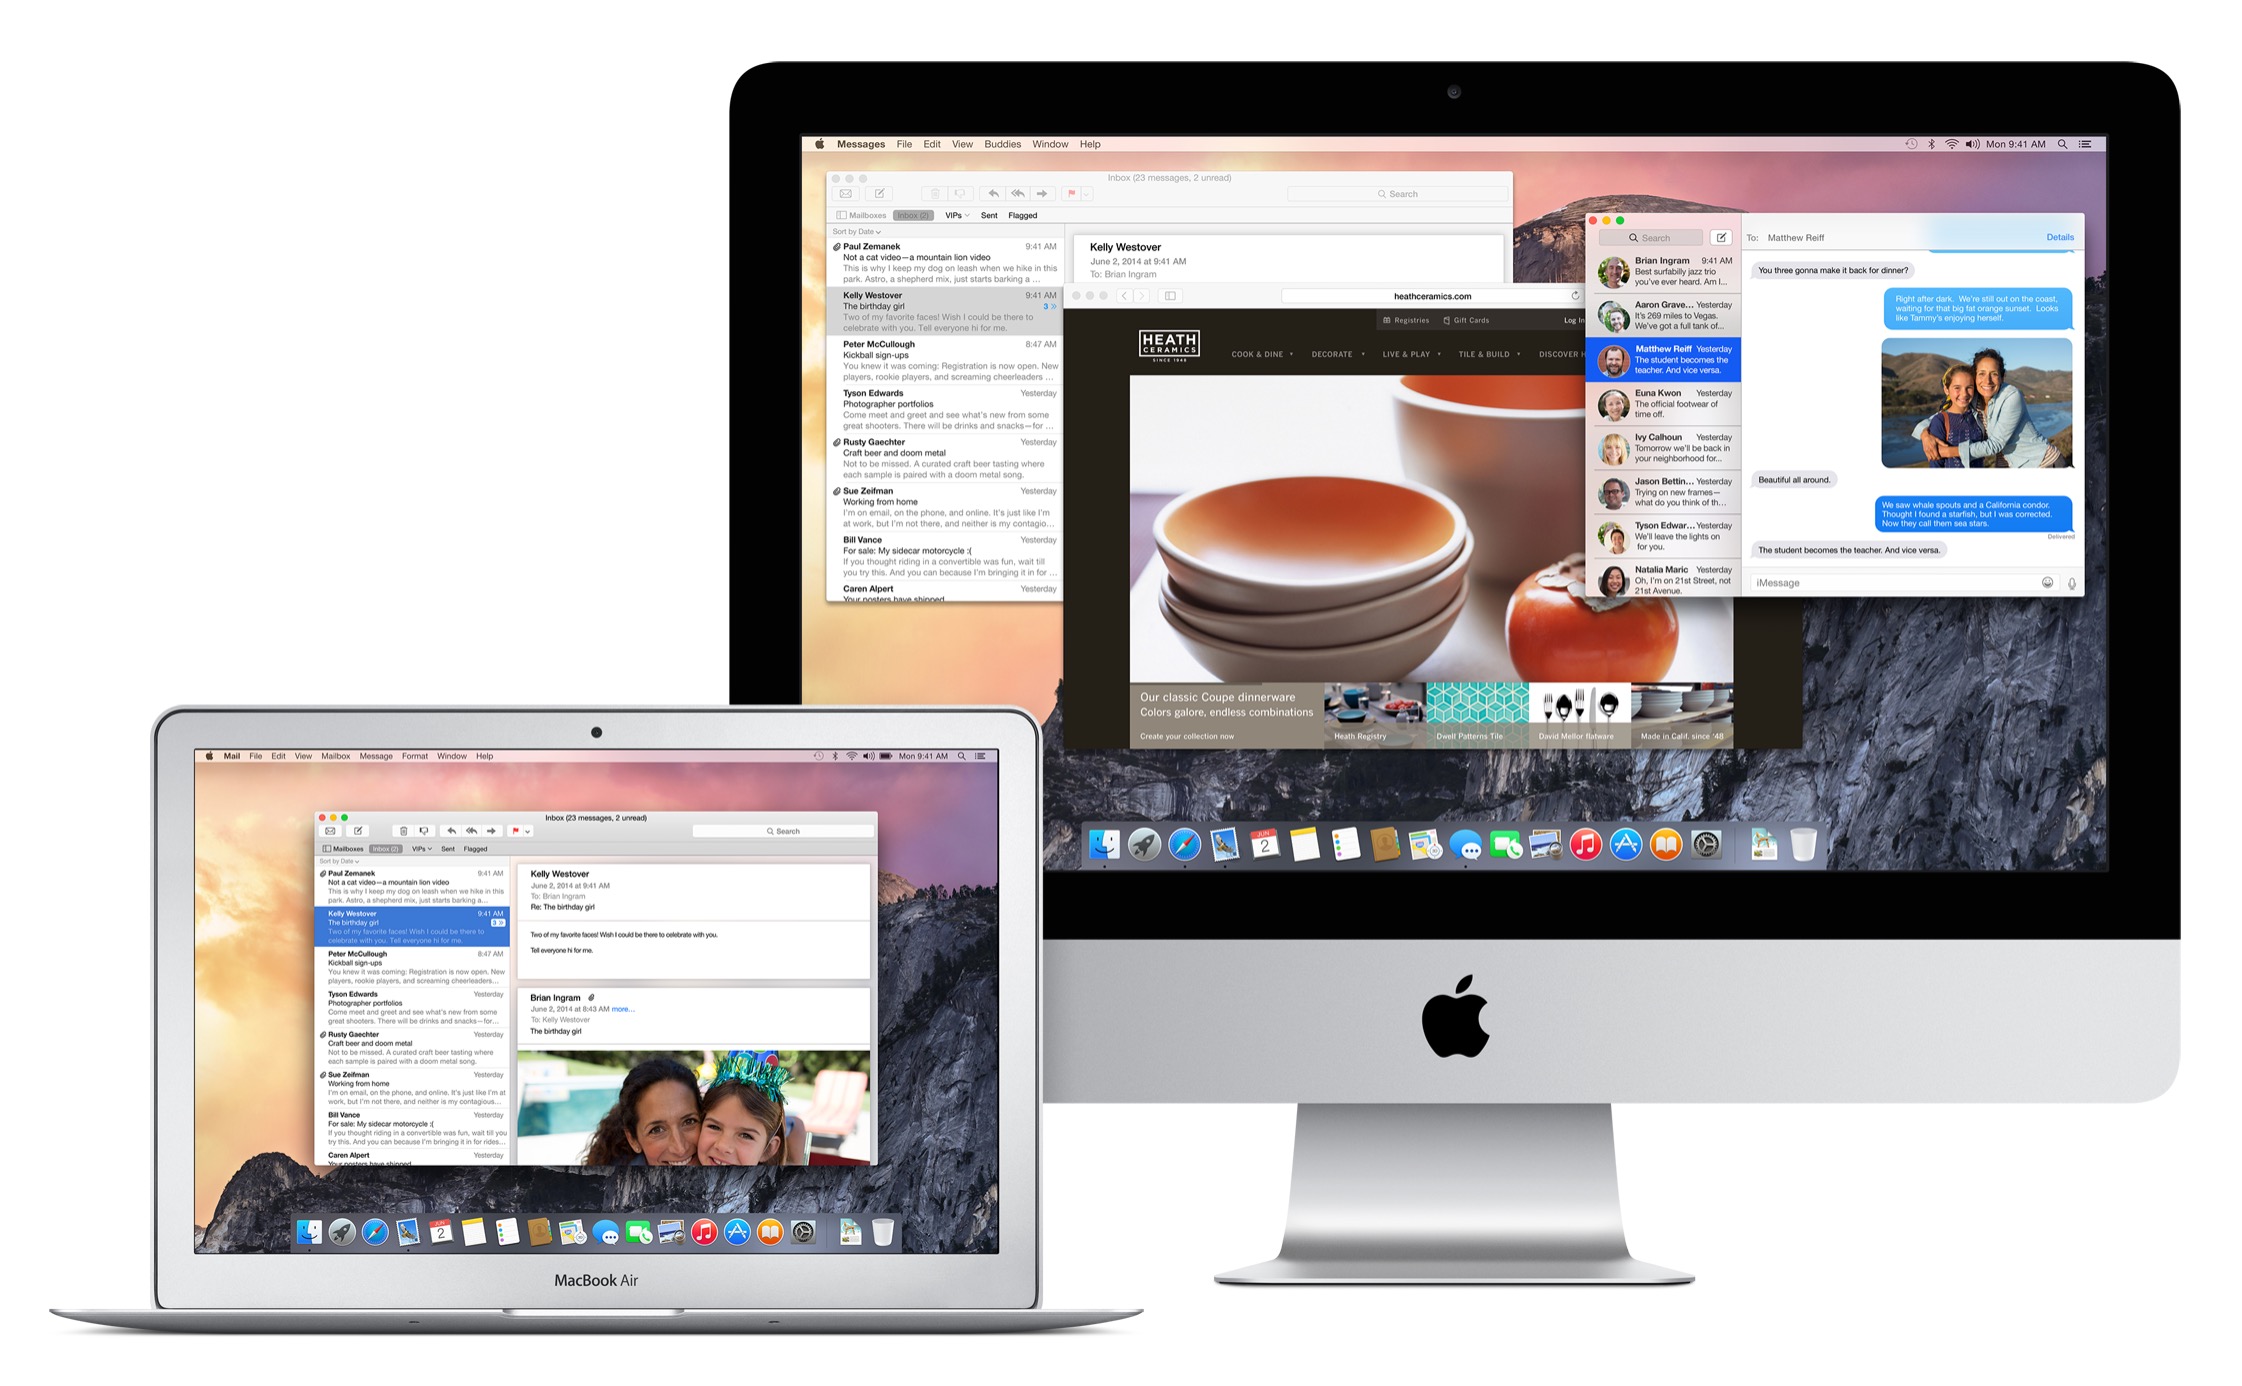 OS X 10.10.3 beta and Photos.app for OS X beta is now free to download